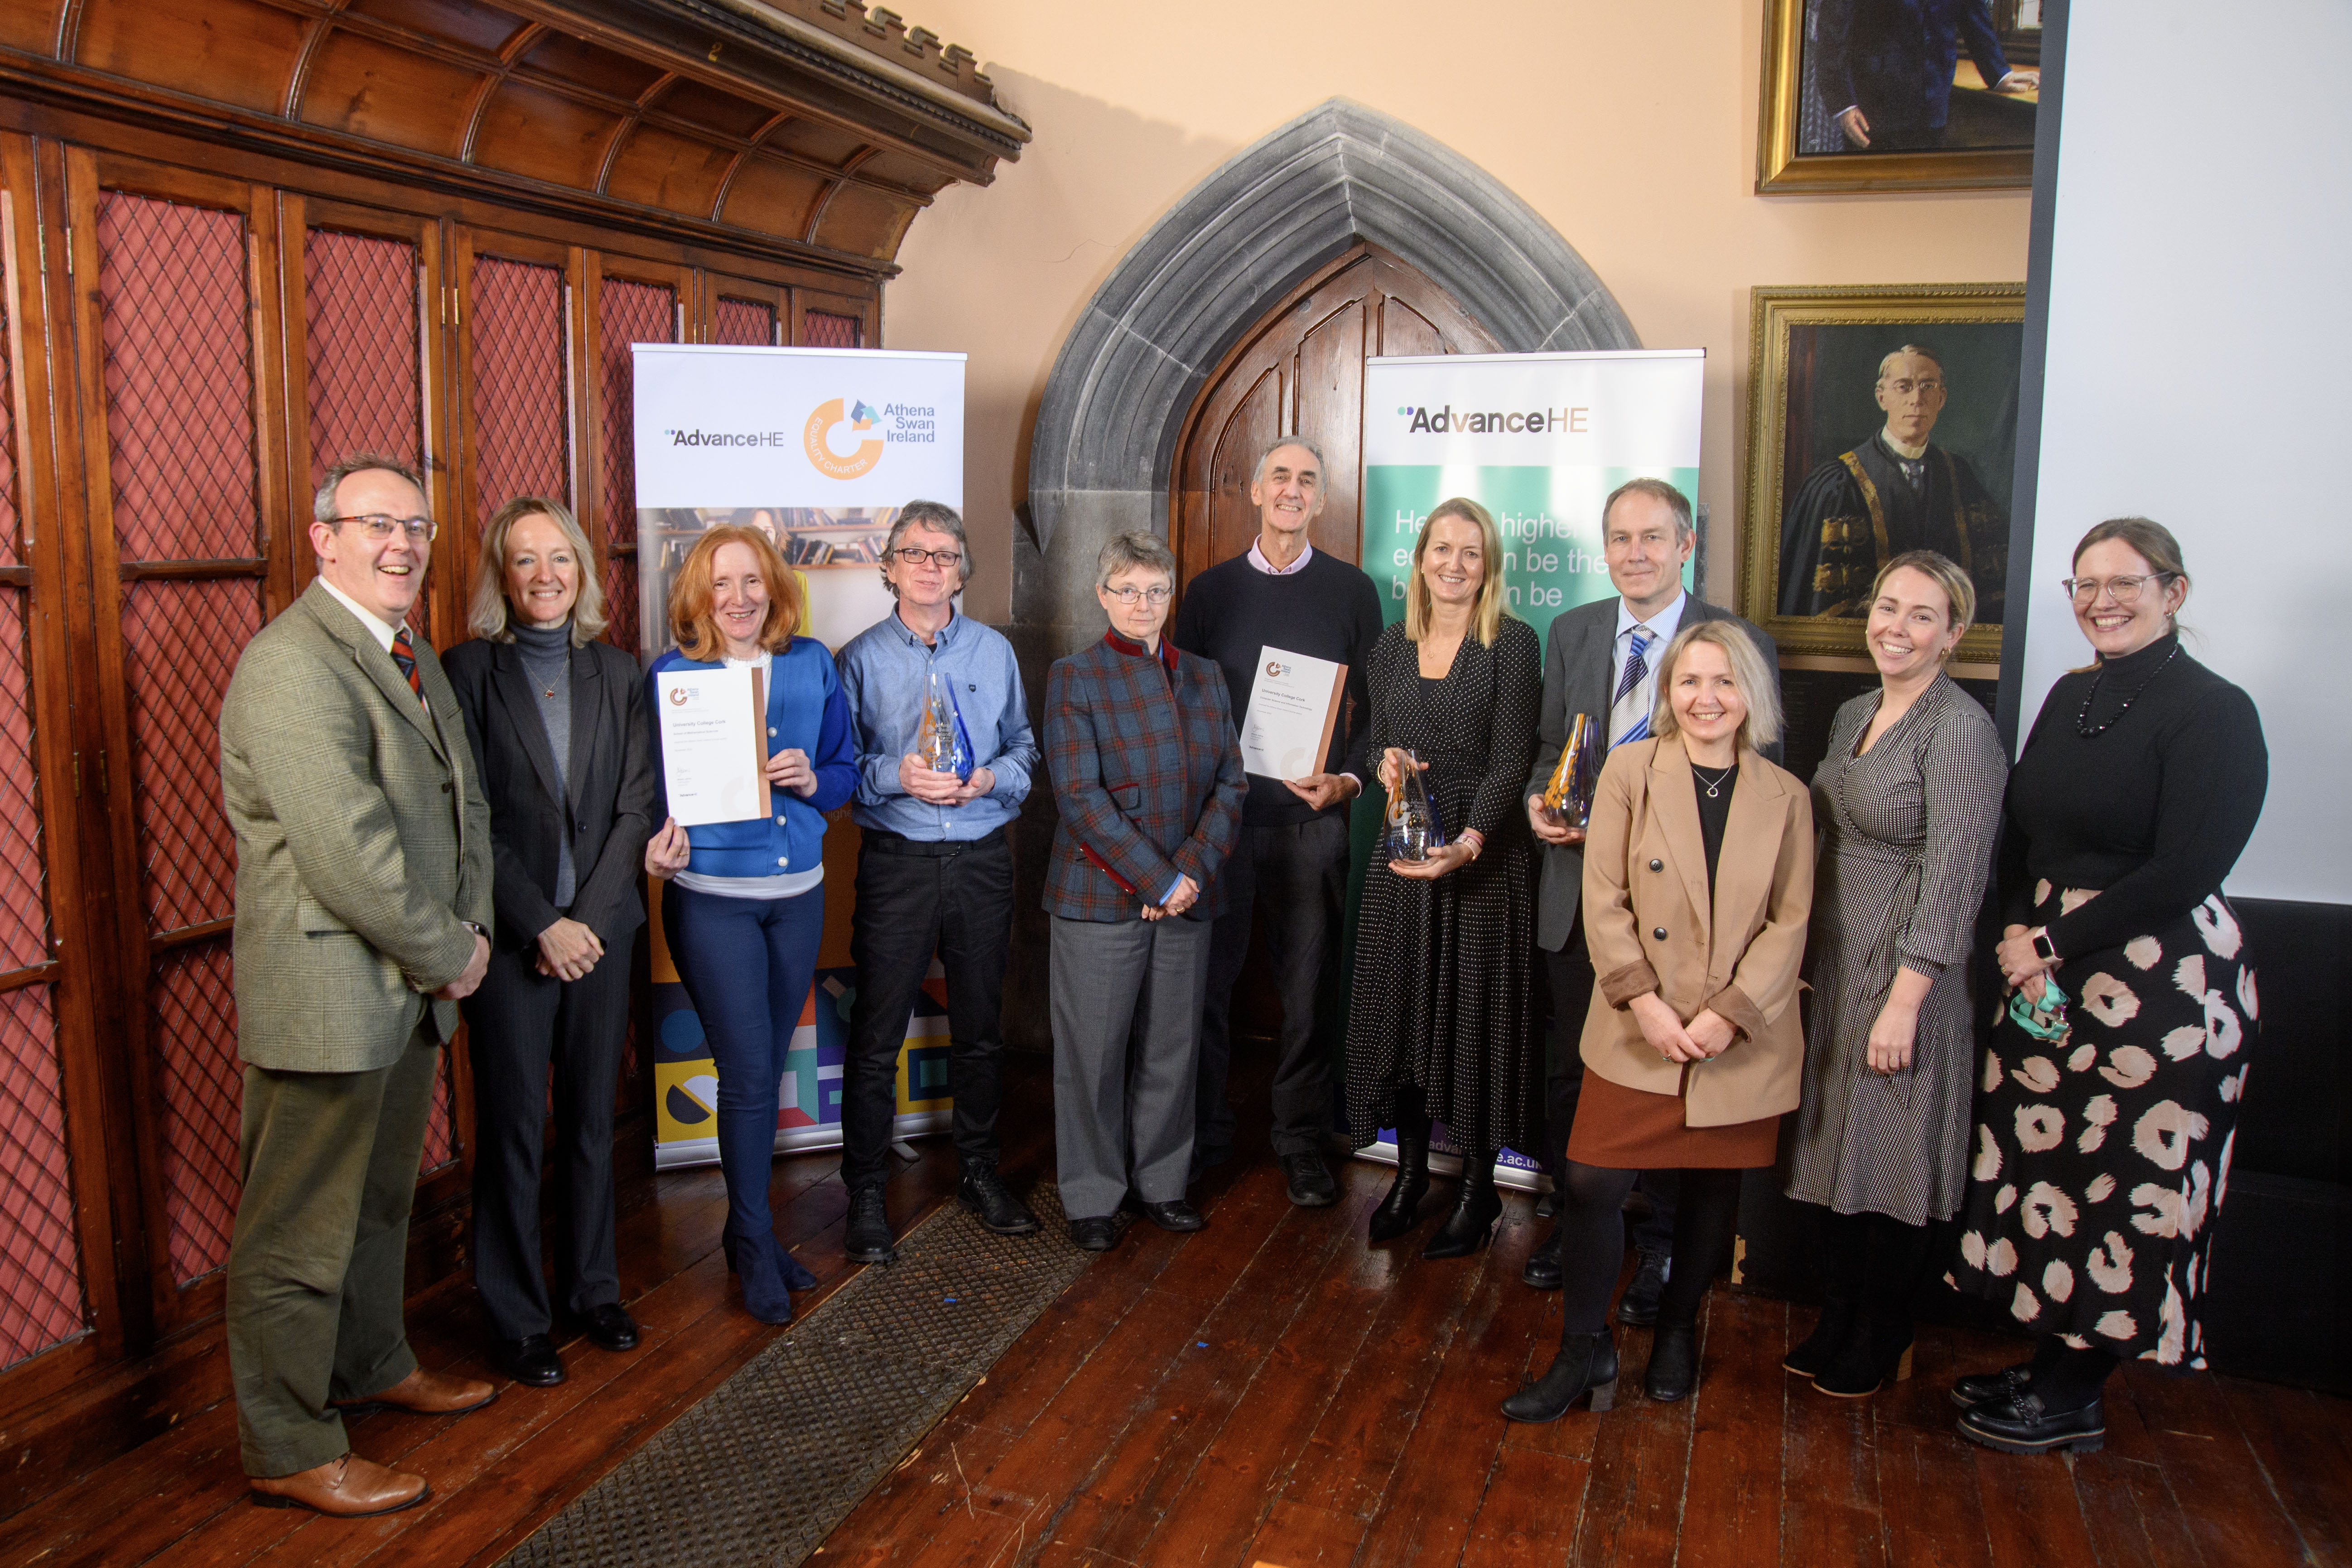 L-R: Professor Stephen Byrne (Deputy President & Registrar); Ms Clodagh McAllen, Ms Kathleen O’Sullivan, Dr Tony Fitzgerald (School of Mathematical Sciences); Professor Nicole Müller, Dr Ciara O’Toole (School of Clinical Therapies); Professor John Morrison, Professor Utz Roedig (School of Computer Science and Information Technology); Ms Katarzyna Pyrz (Equality Data Analyst), Ms Sarah Murtagh (Athena SWAN Project Officer), and Dr Claire Murray (Interim EDI Unit Director)